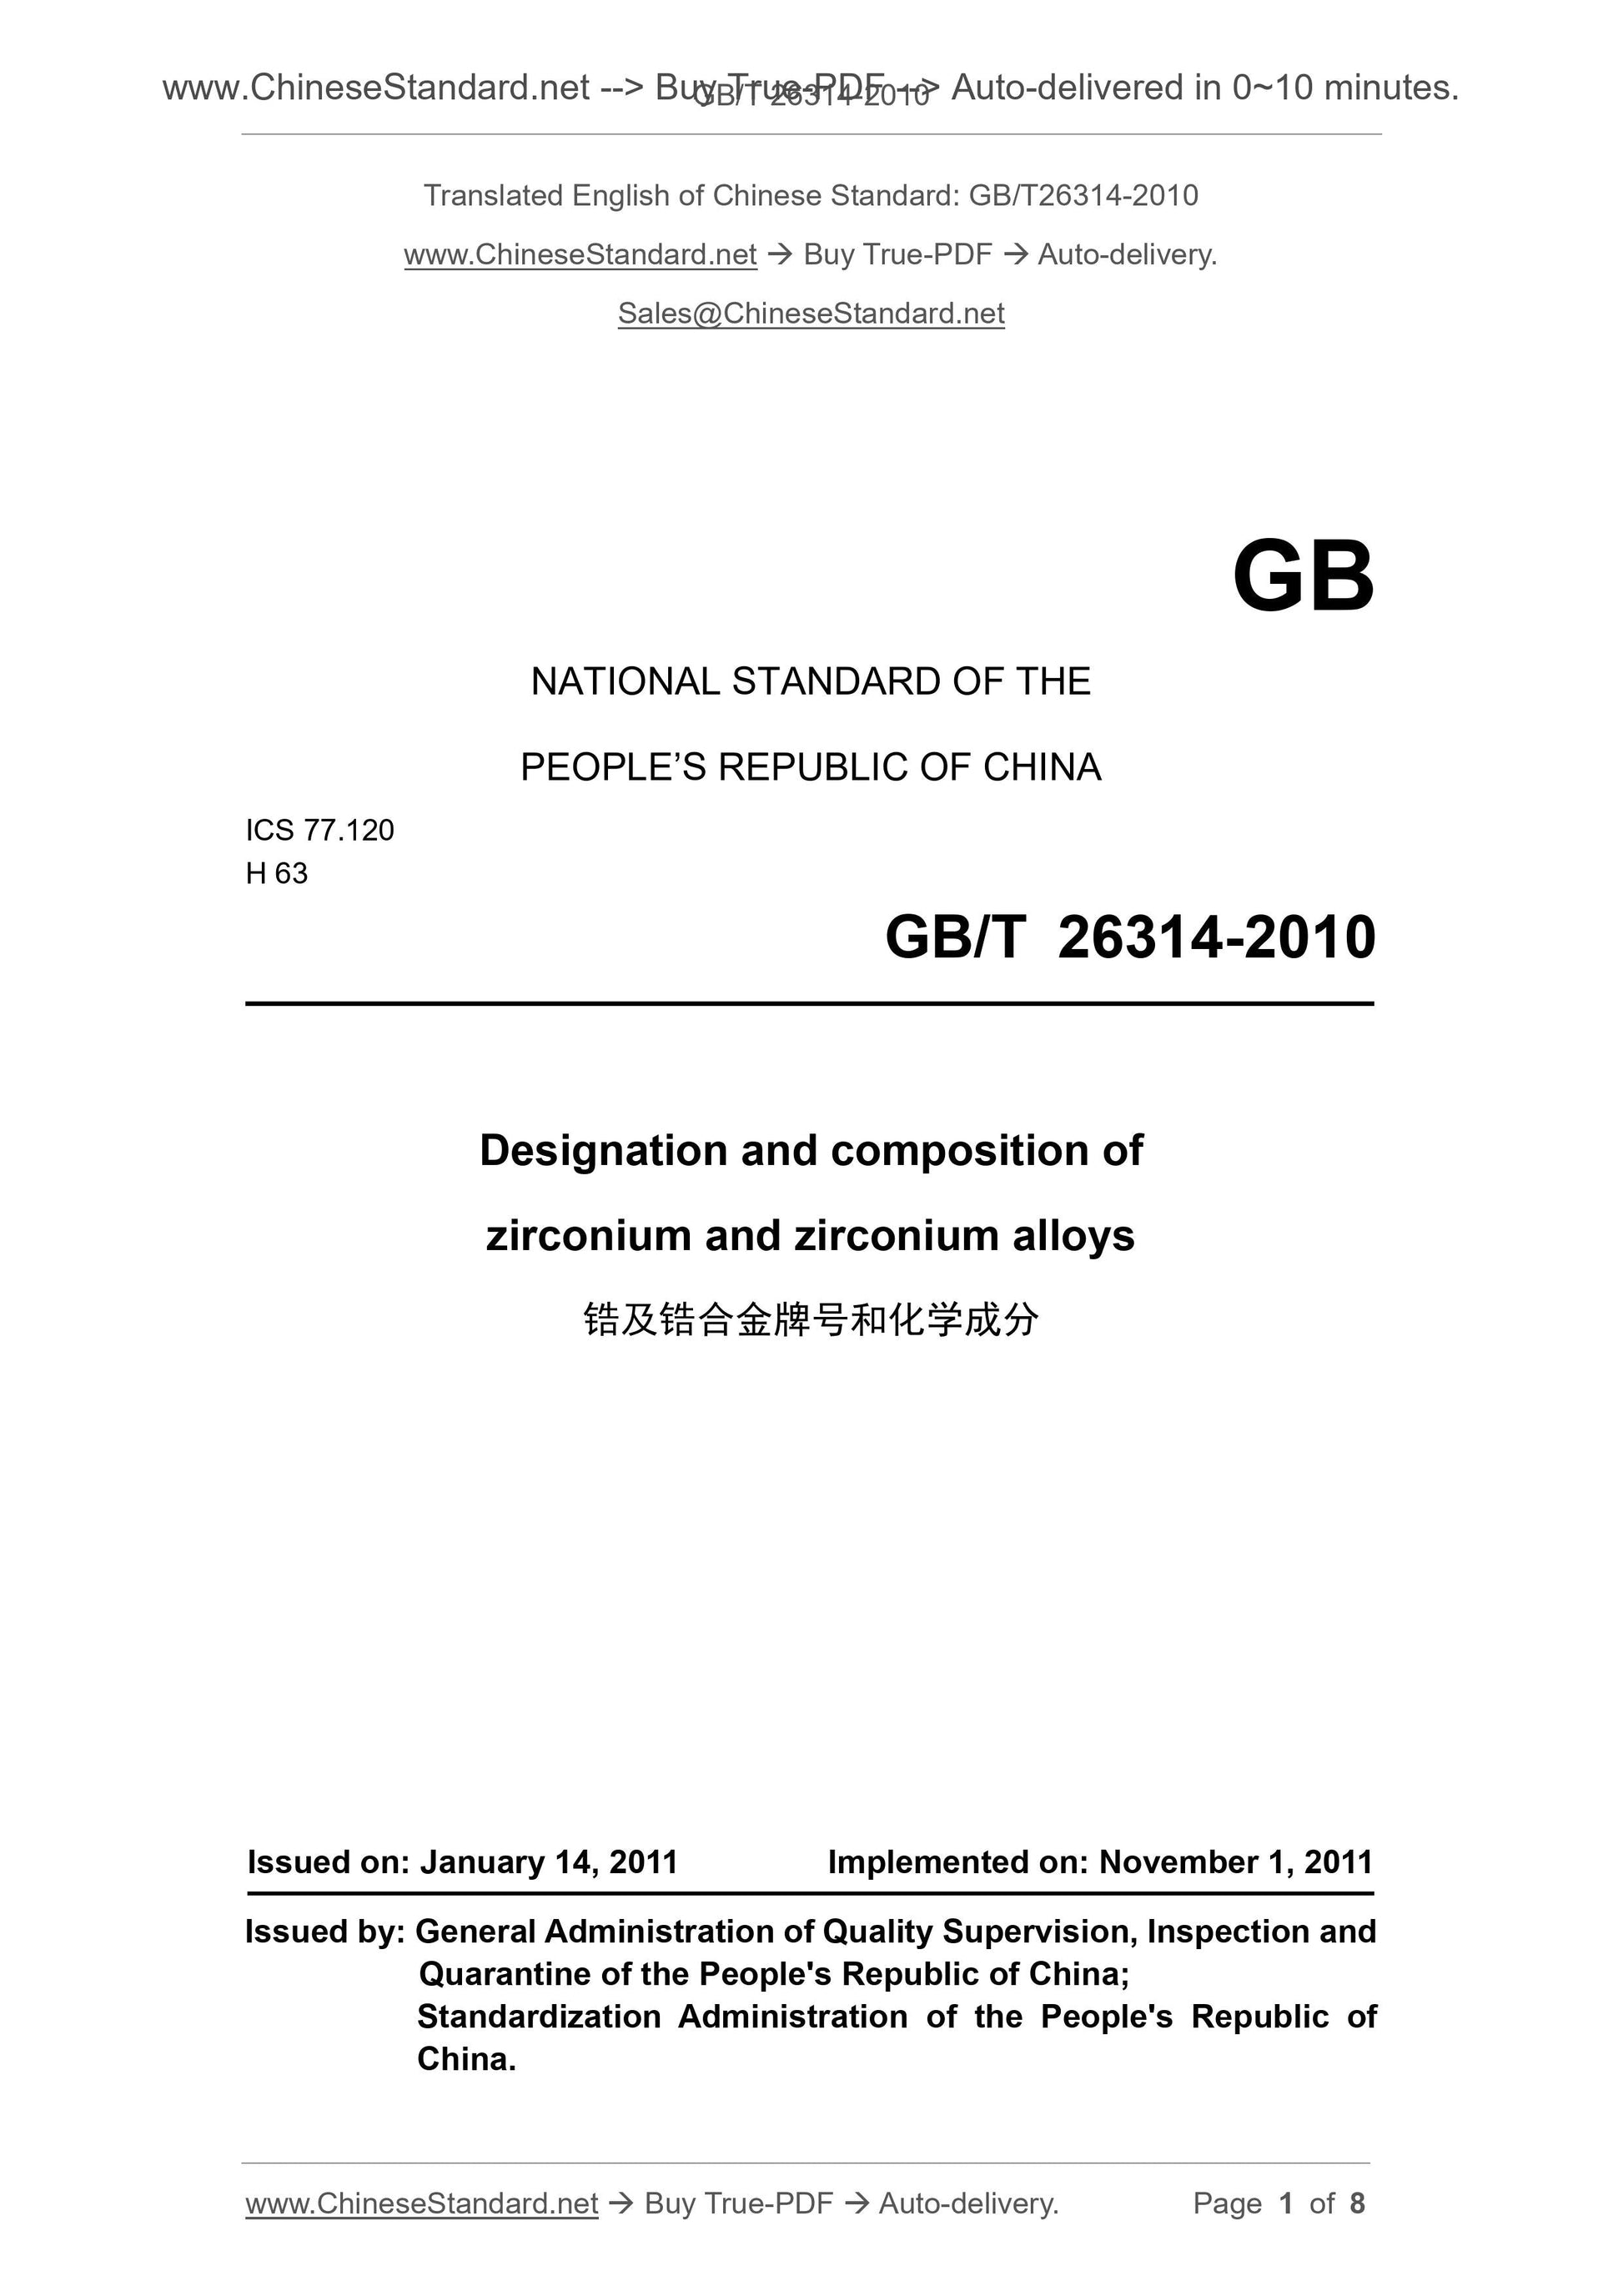 GB/T 26314-2010 Page 1